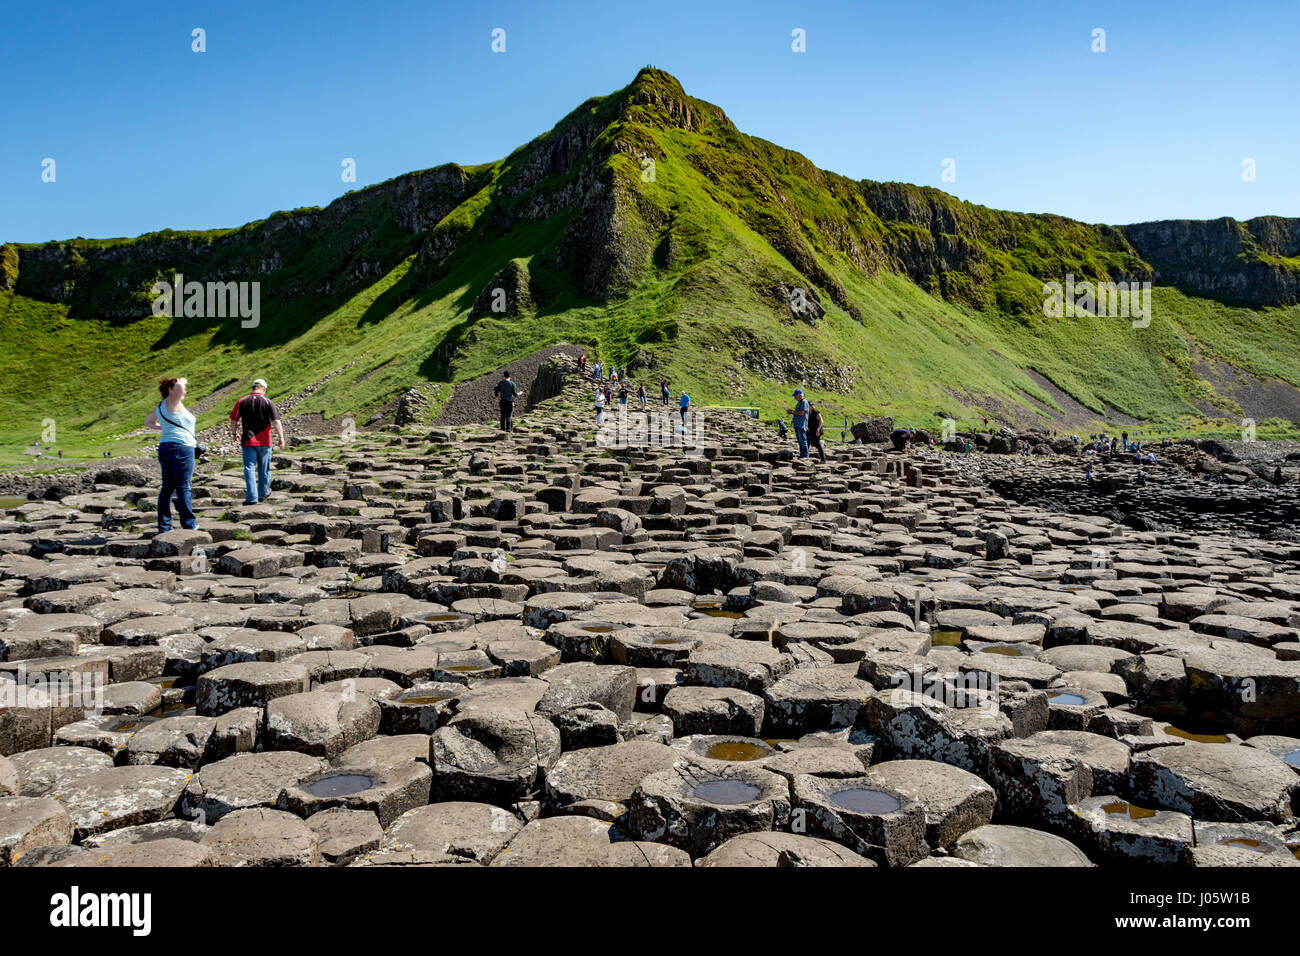 Aird Snout and the Grand Causeway of the Giant's Causeway, Causeway Coast, County Antrim, Northern Ireland, UK Stock Photo